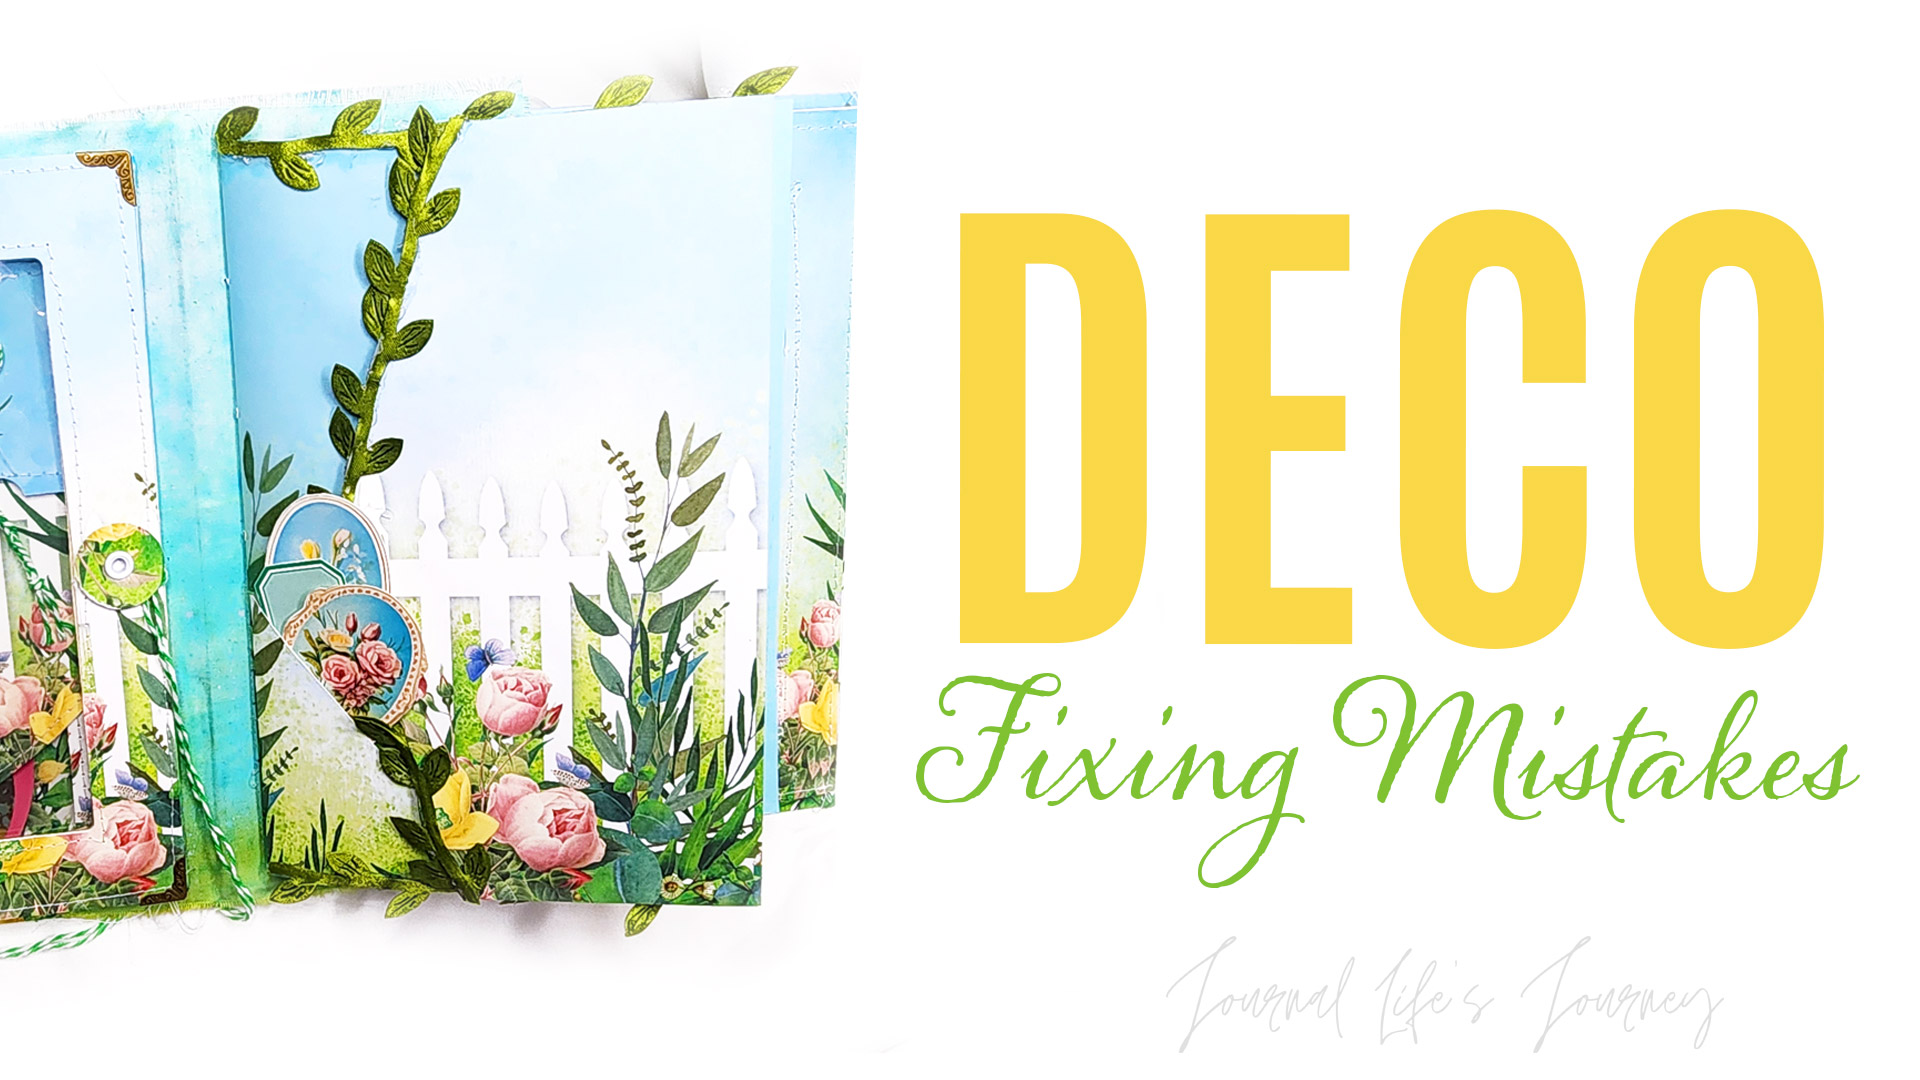 Spring Journal Fixing Mistakes